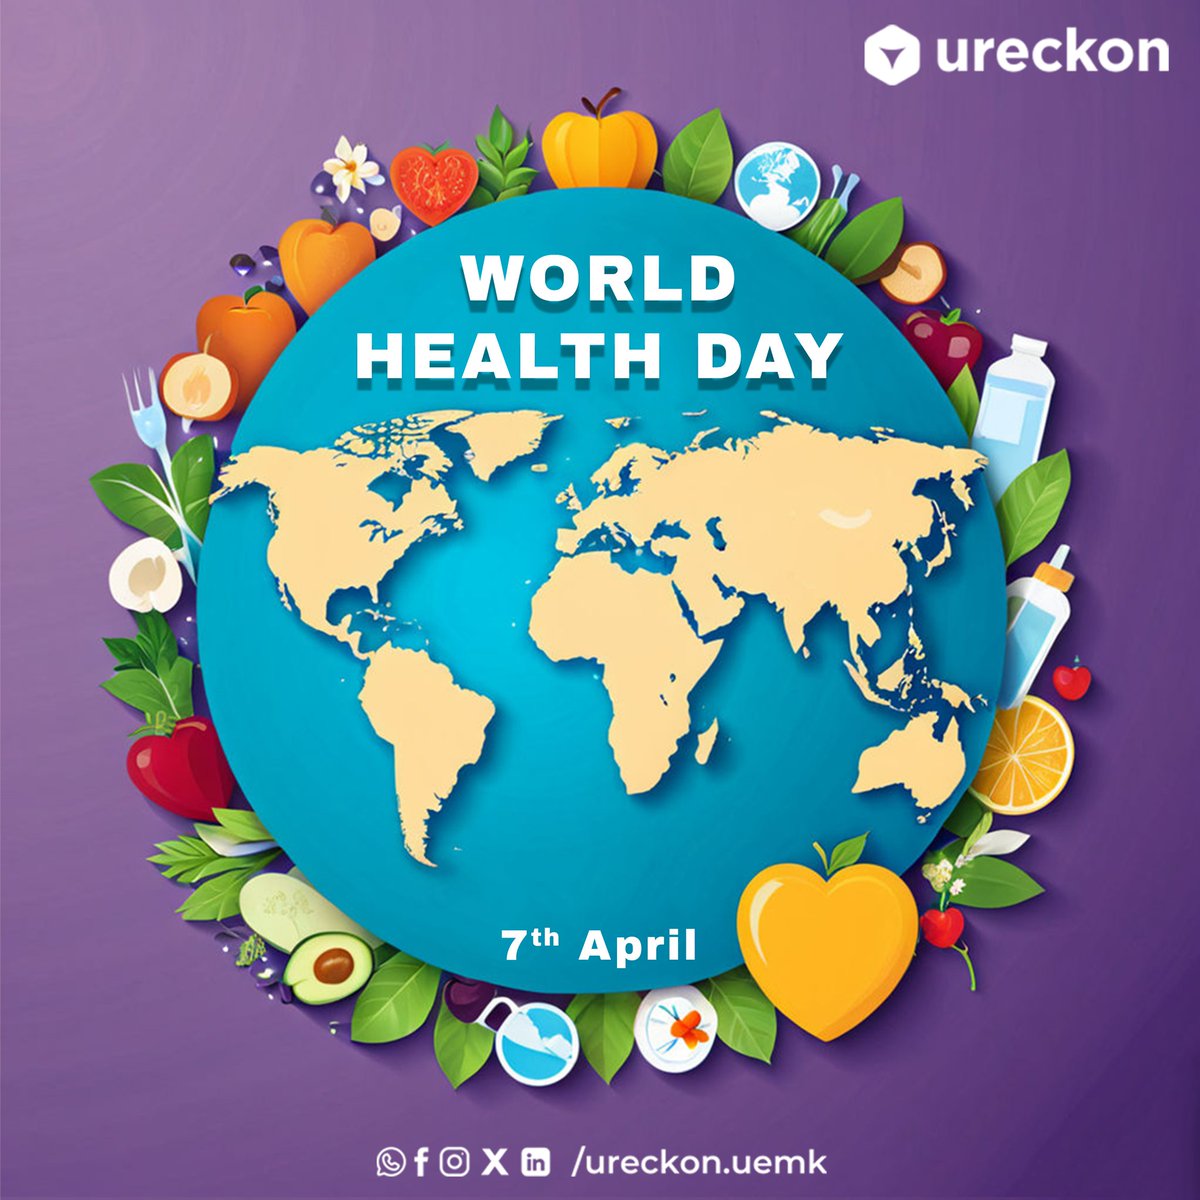 World Health Day on April 7th promotes global health awareness, preventive measures, and universal healthcare access. It rallies governments, organizations, and communities to tackle health challenges for a healthier world. #WorldHealthDay #HealthForAll